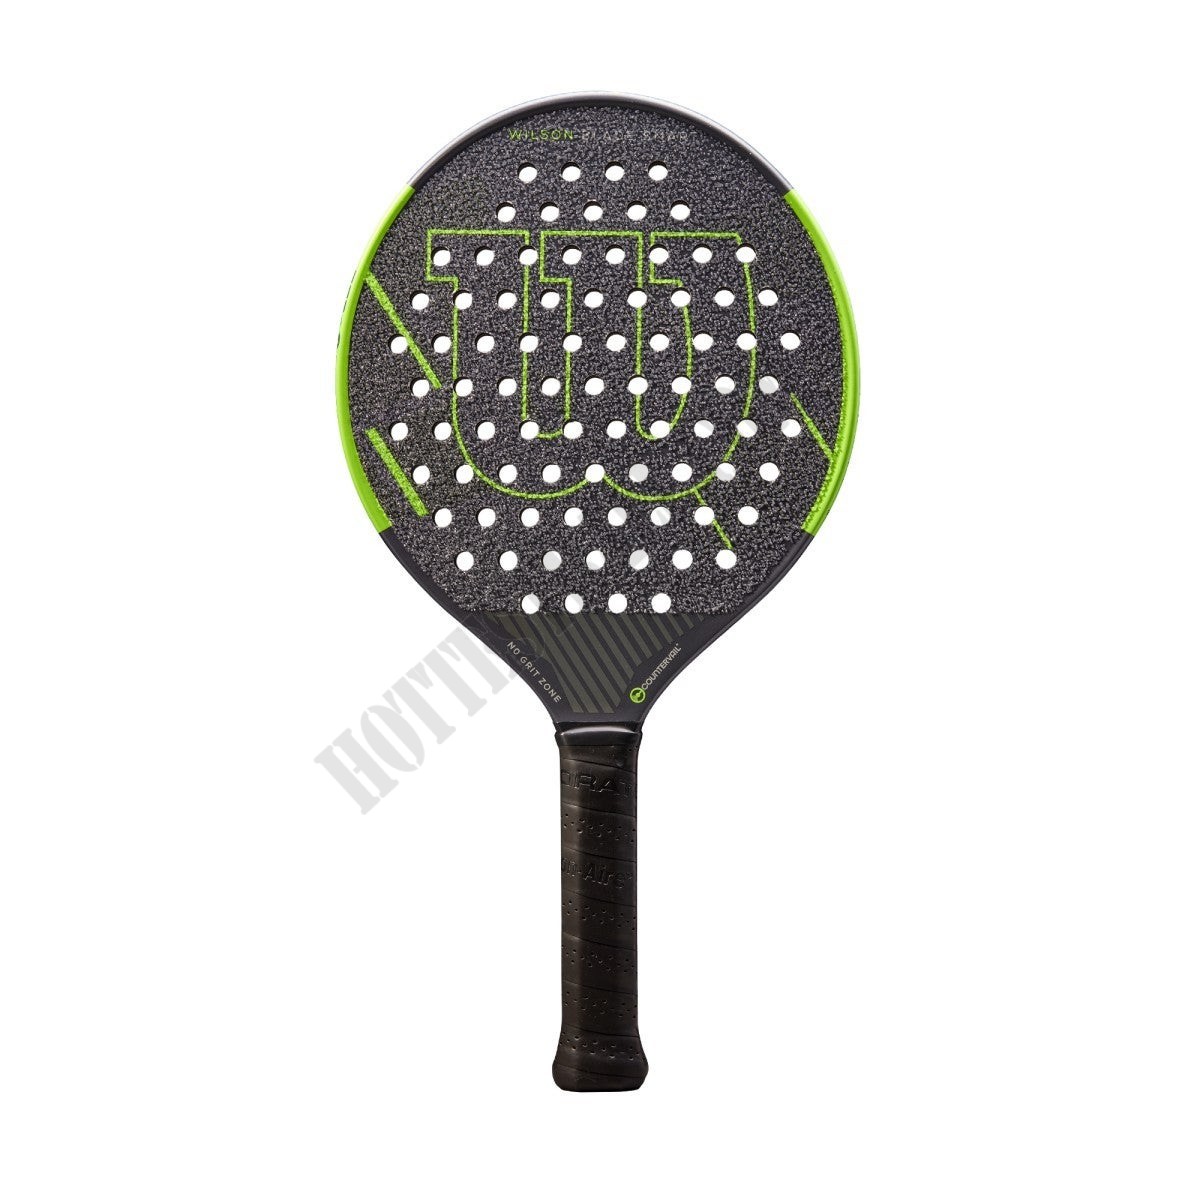 Blade Smart Countervail Platform Tennis Paddle - Wilson Discount Store - Blade Smart Countervail Platform Tennis Paddle - Wilson Discount Store